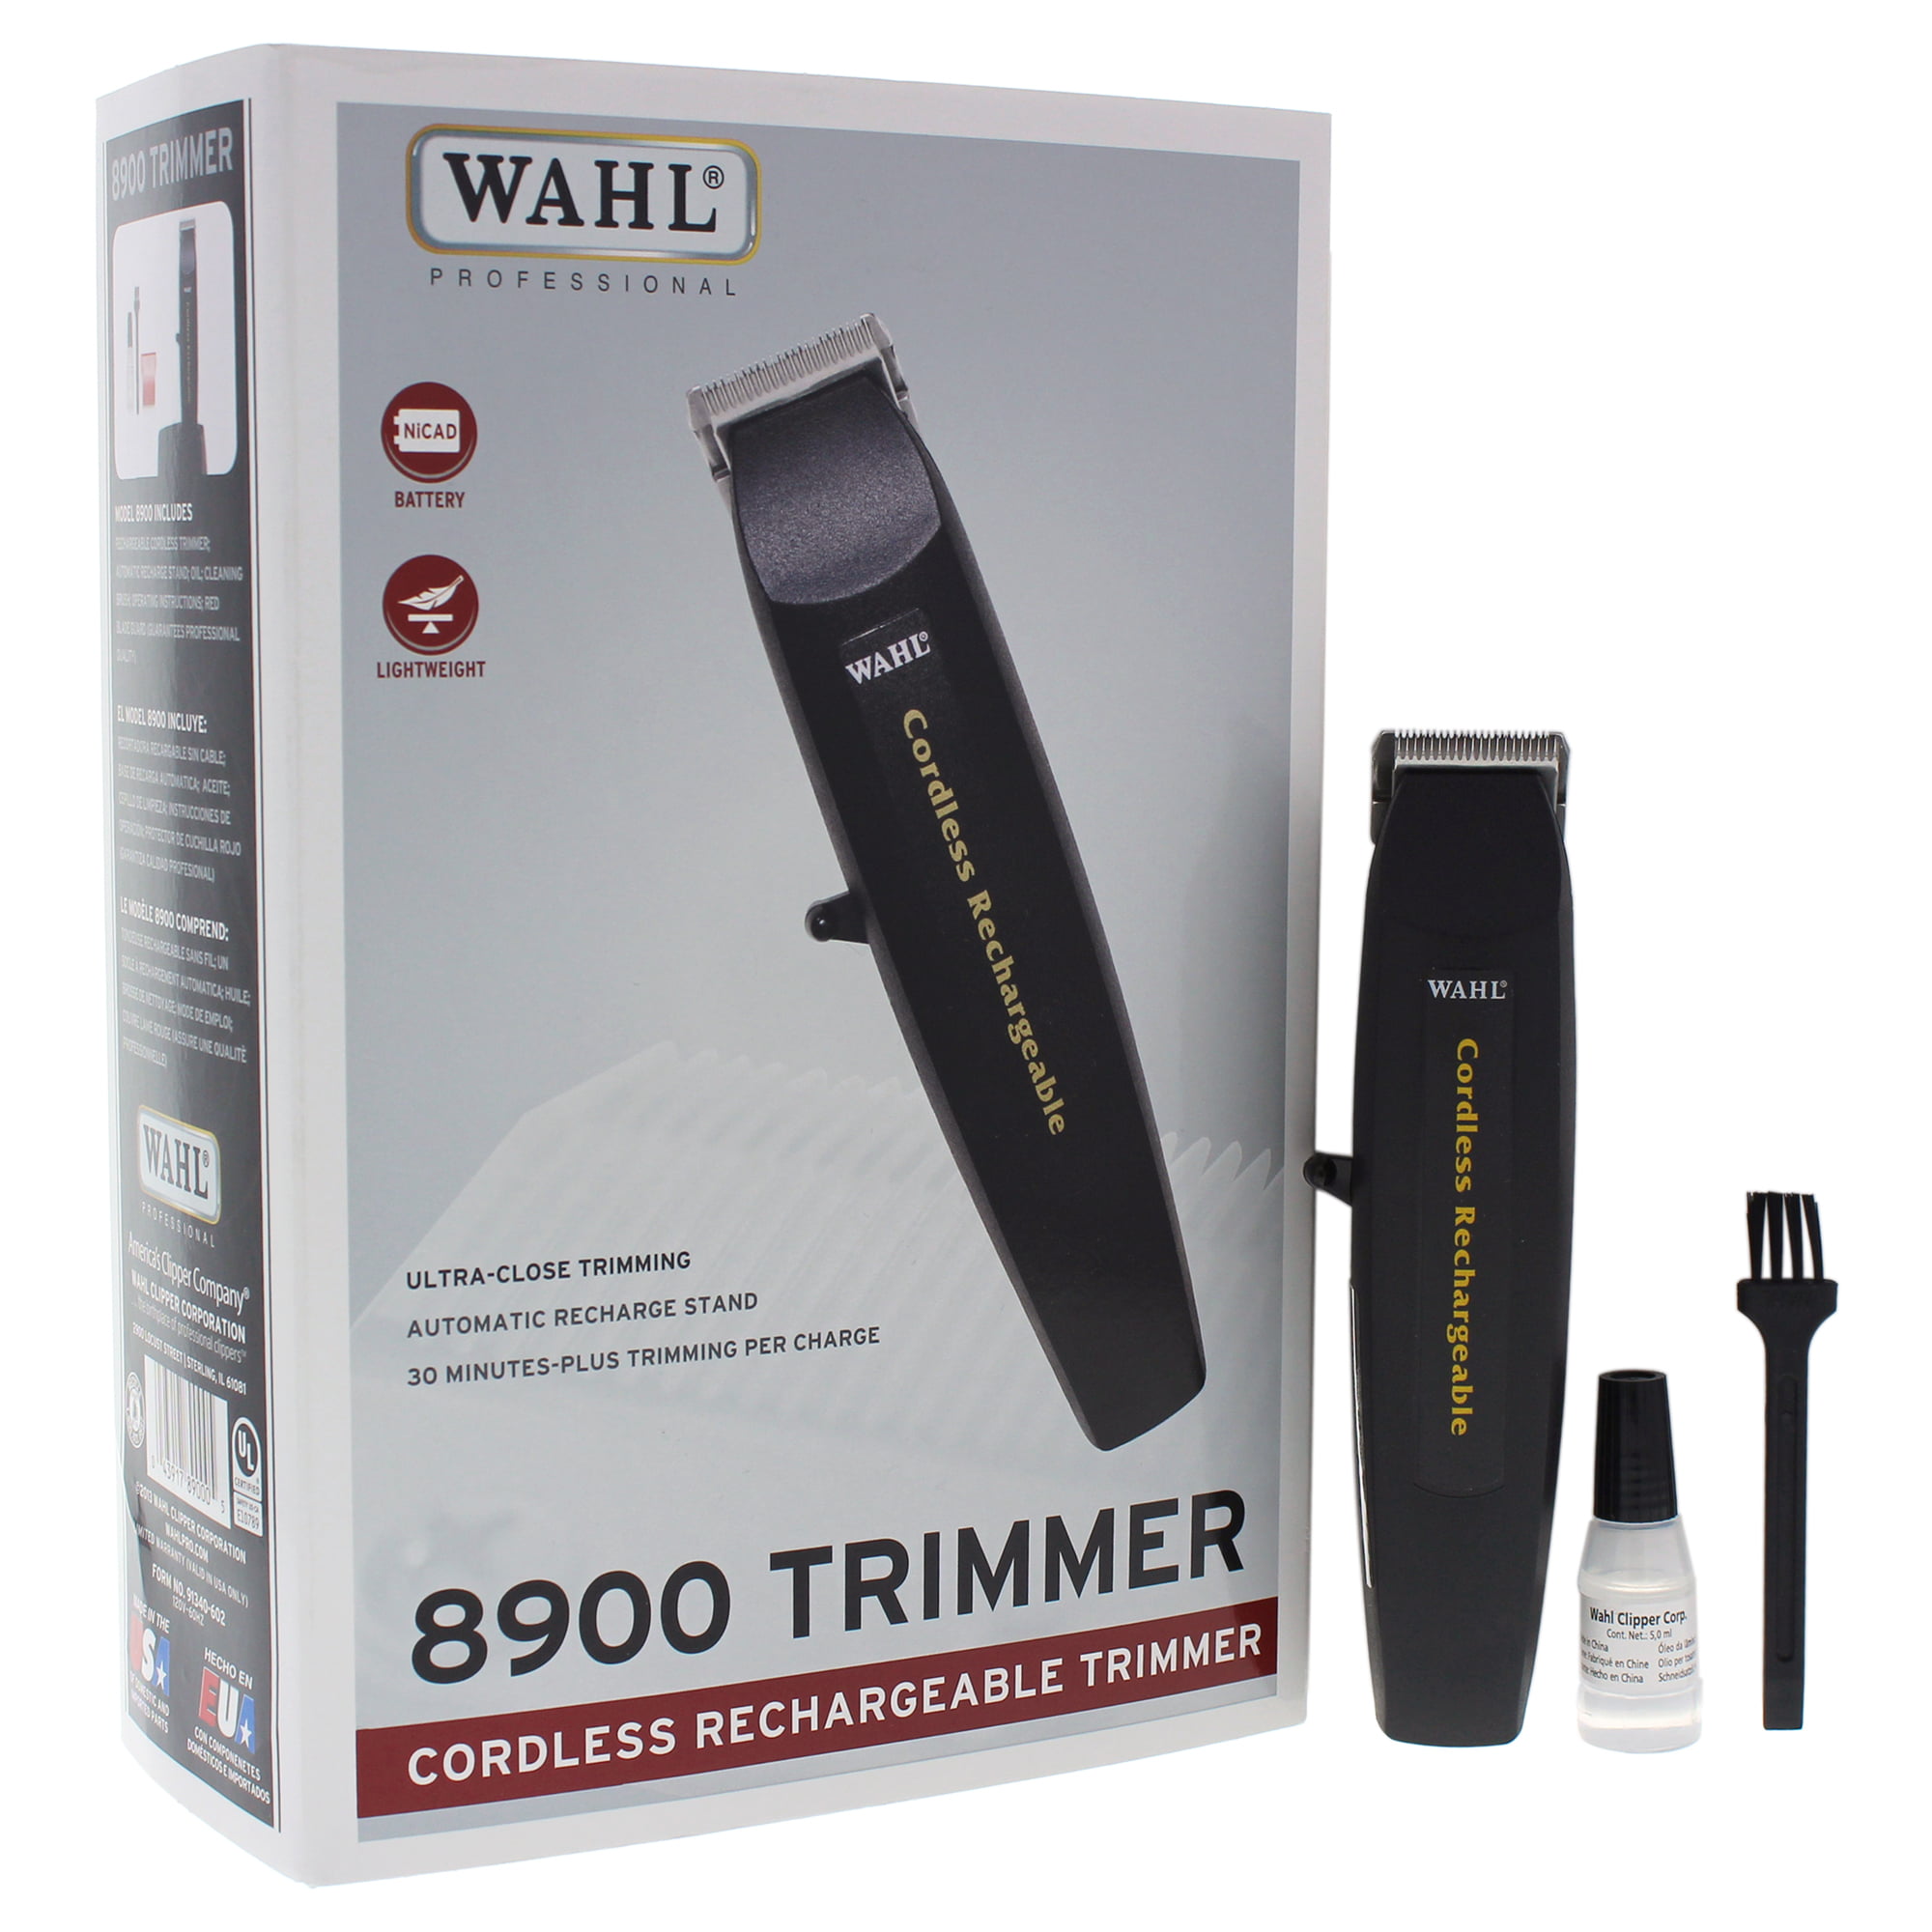 wahl cordless rechargeable trimmer